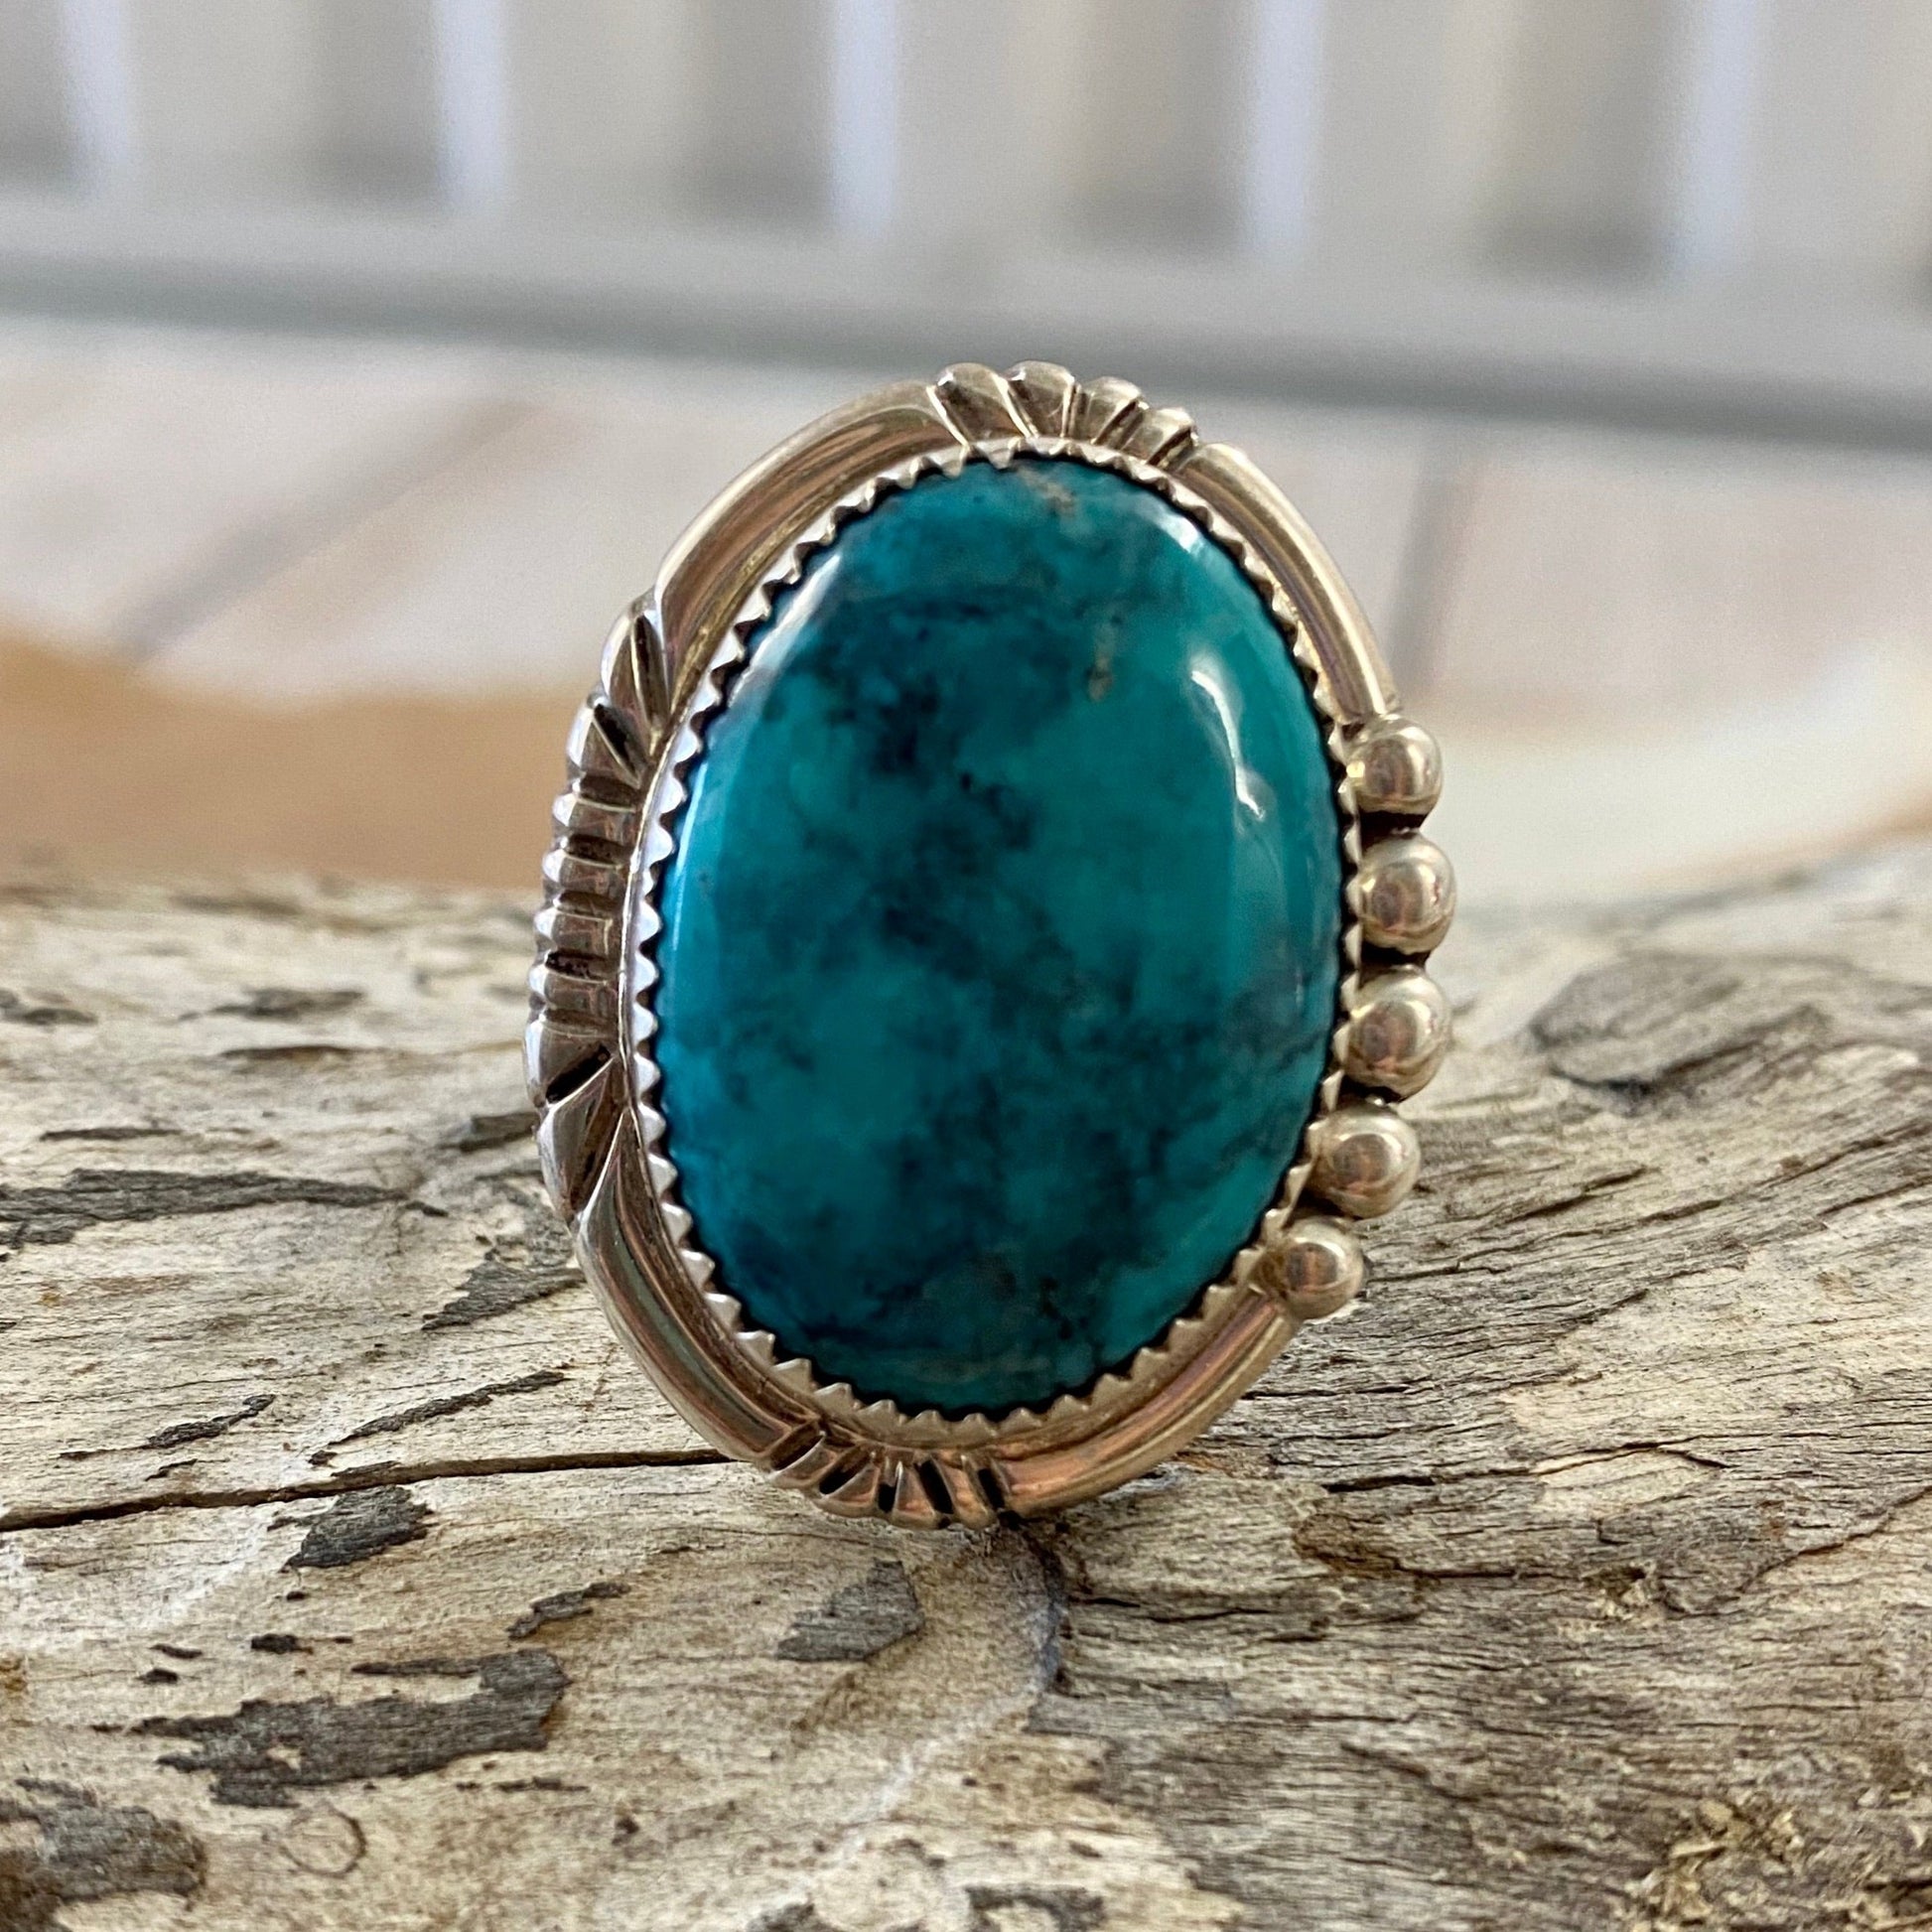 Stamped sterling and signed AB JR by Native American artist silversmith Allen Boy Jr. turquoise ring. Men's Western Turquoise Ring | Women's Western Jewelry | Sterling Silver Native American Ring | Round Oval Turquoise Ring Size 10 | Turquoise Native Made Ring | Western Jewelry Ring | Sterling Silver Turquoise Ring